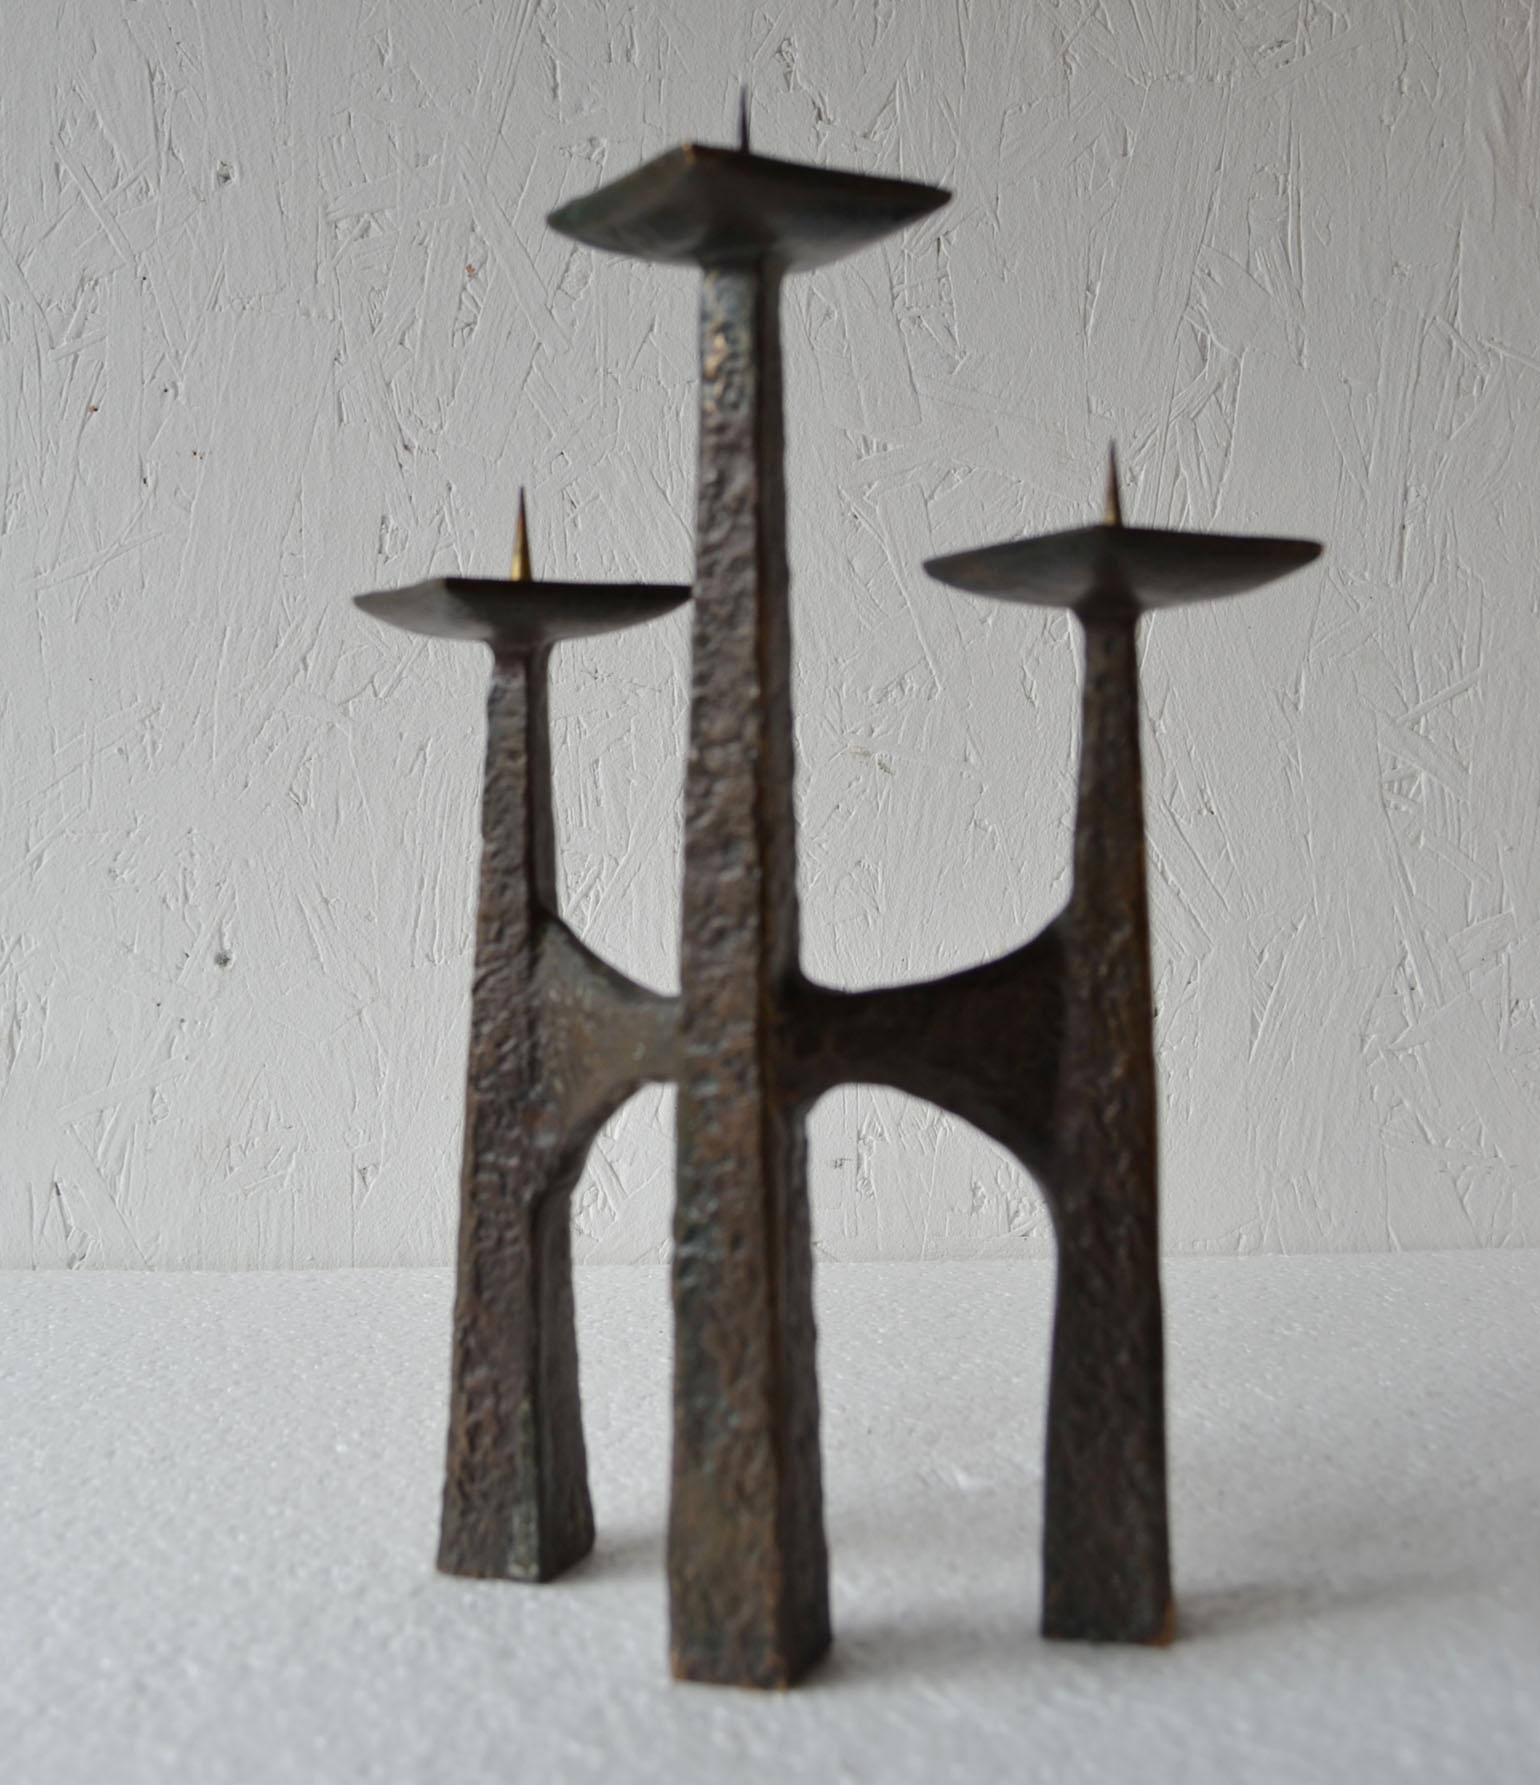 Sculptural three arm candle holder on alternating heights for fat candles (3-4 cm wide) with original dark patina.